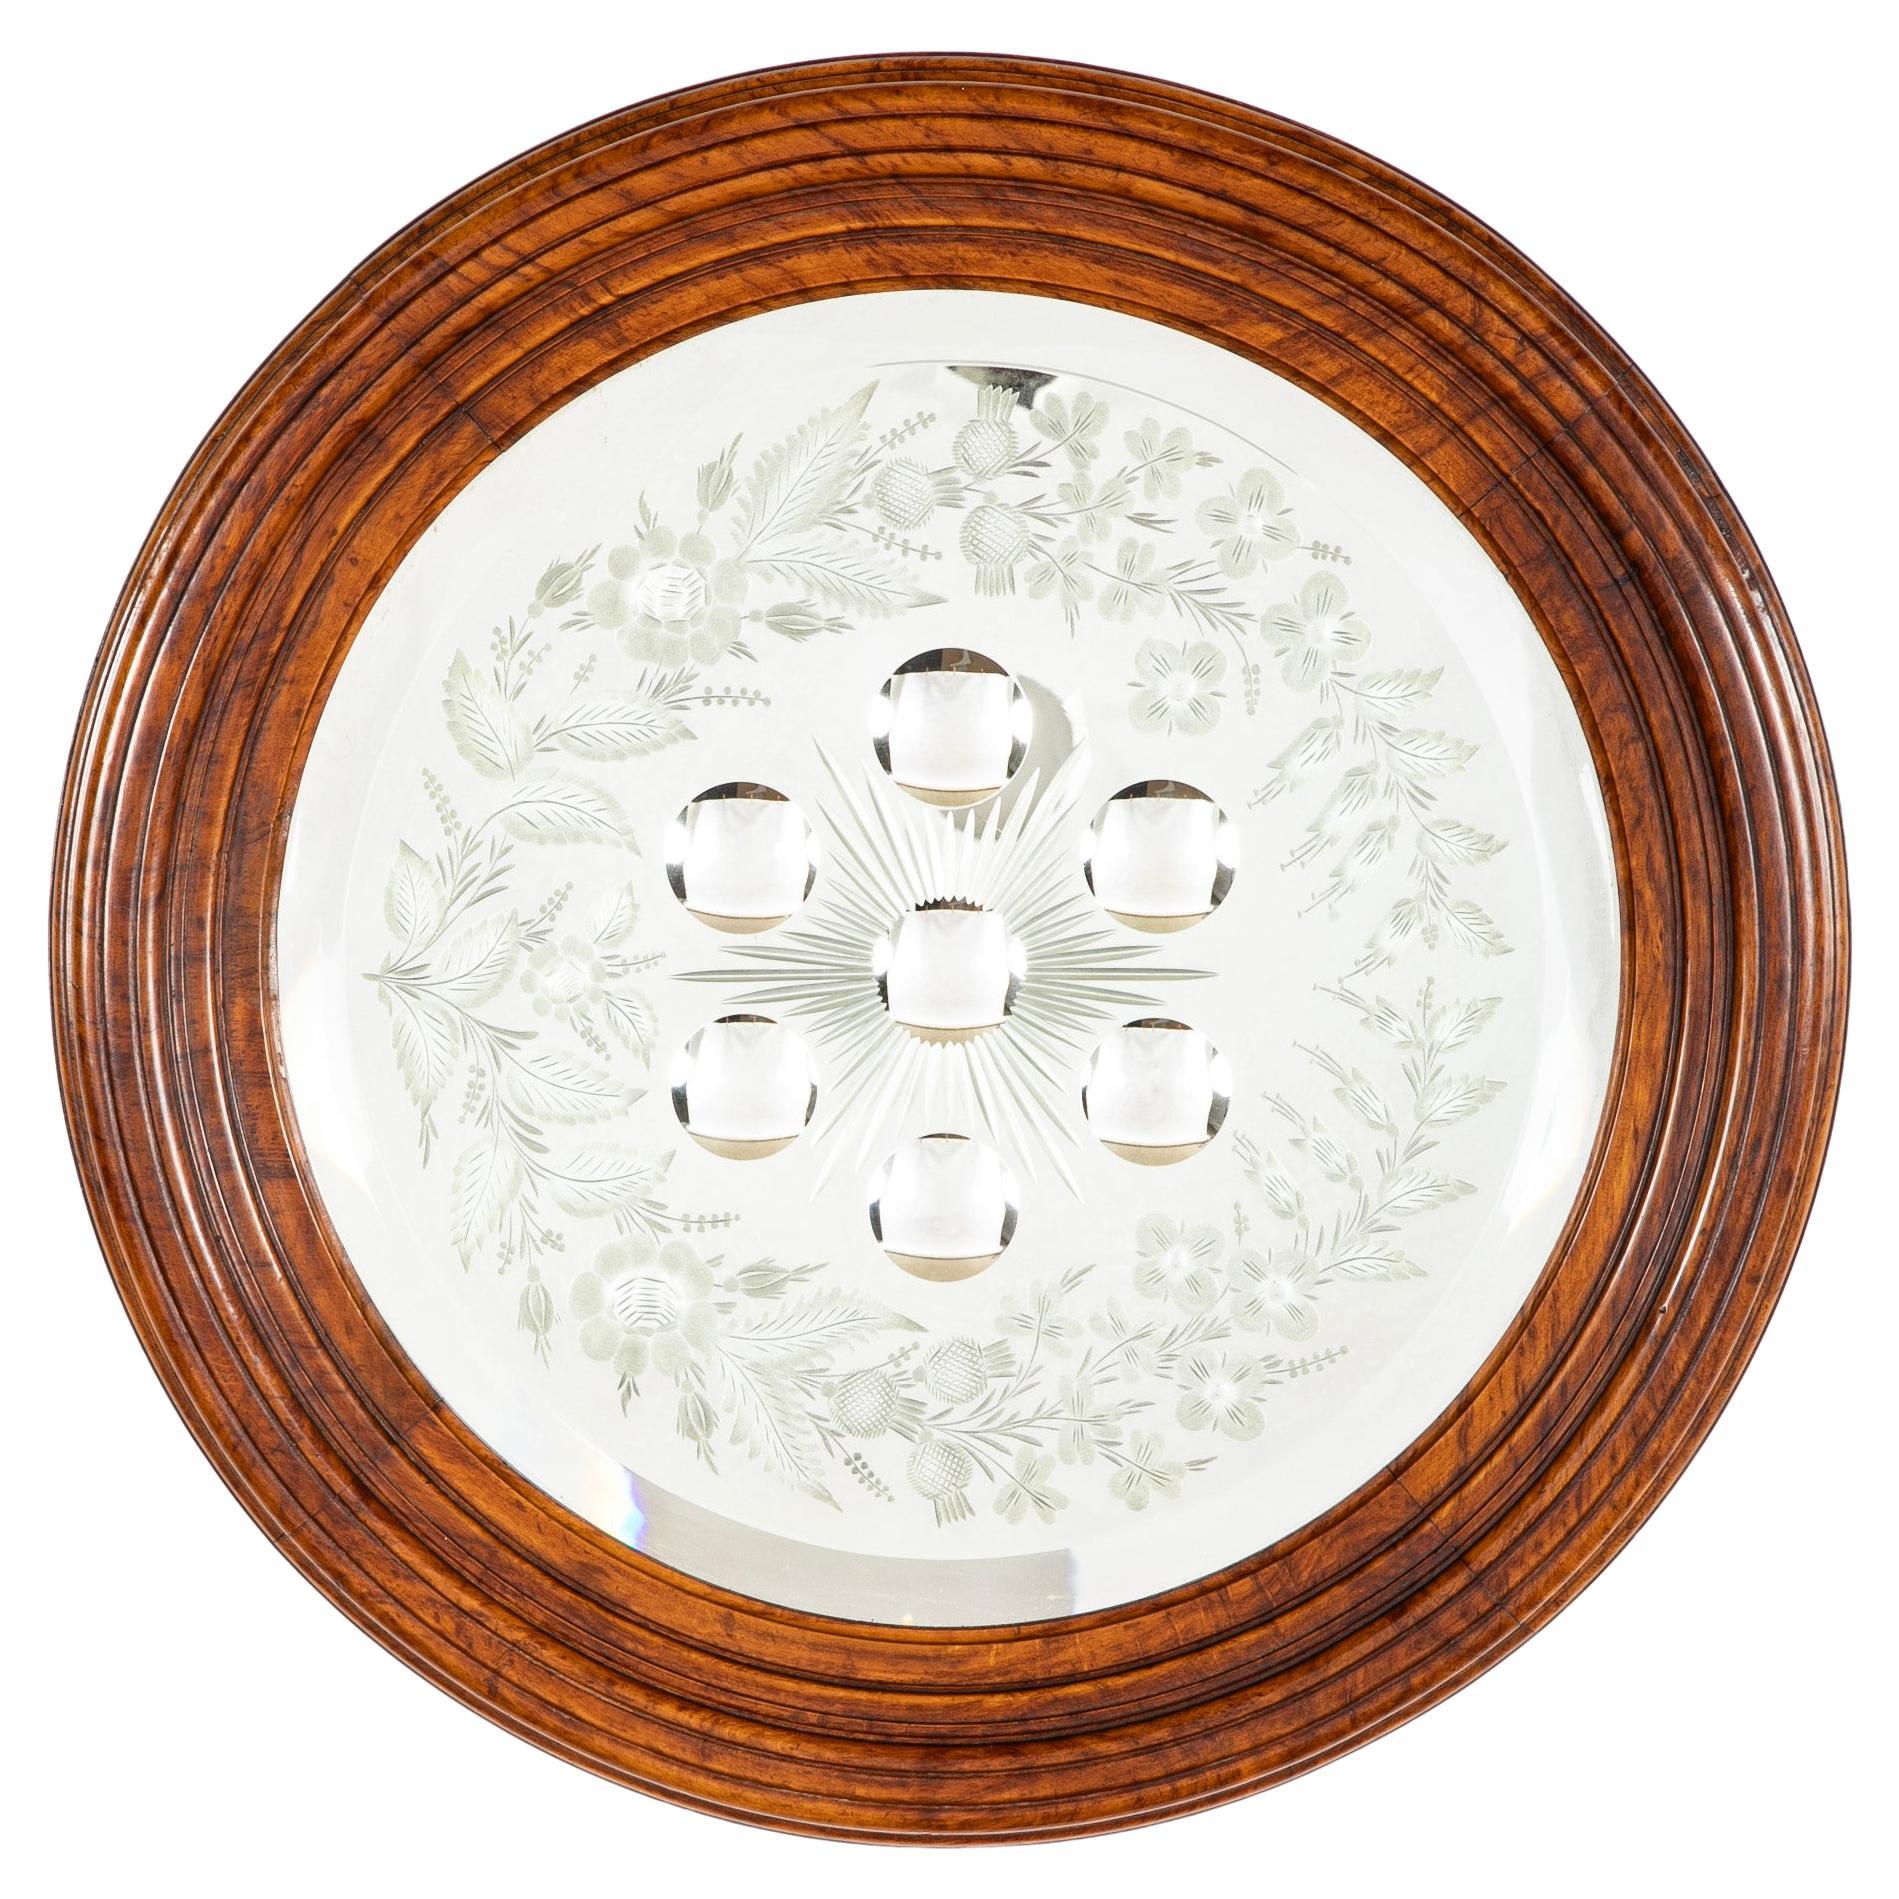 Rare Scottish elm wood mirror, the beveled glass etched with thistles and roses, the center with seven mini convex circles amidst a starburst. The elm wood frame with lovely grain and glowing patina. You won't find another one. 
19.75 inches